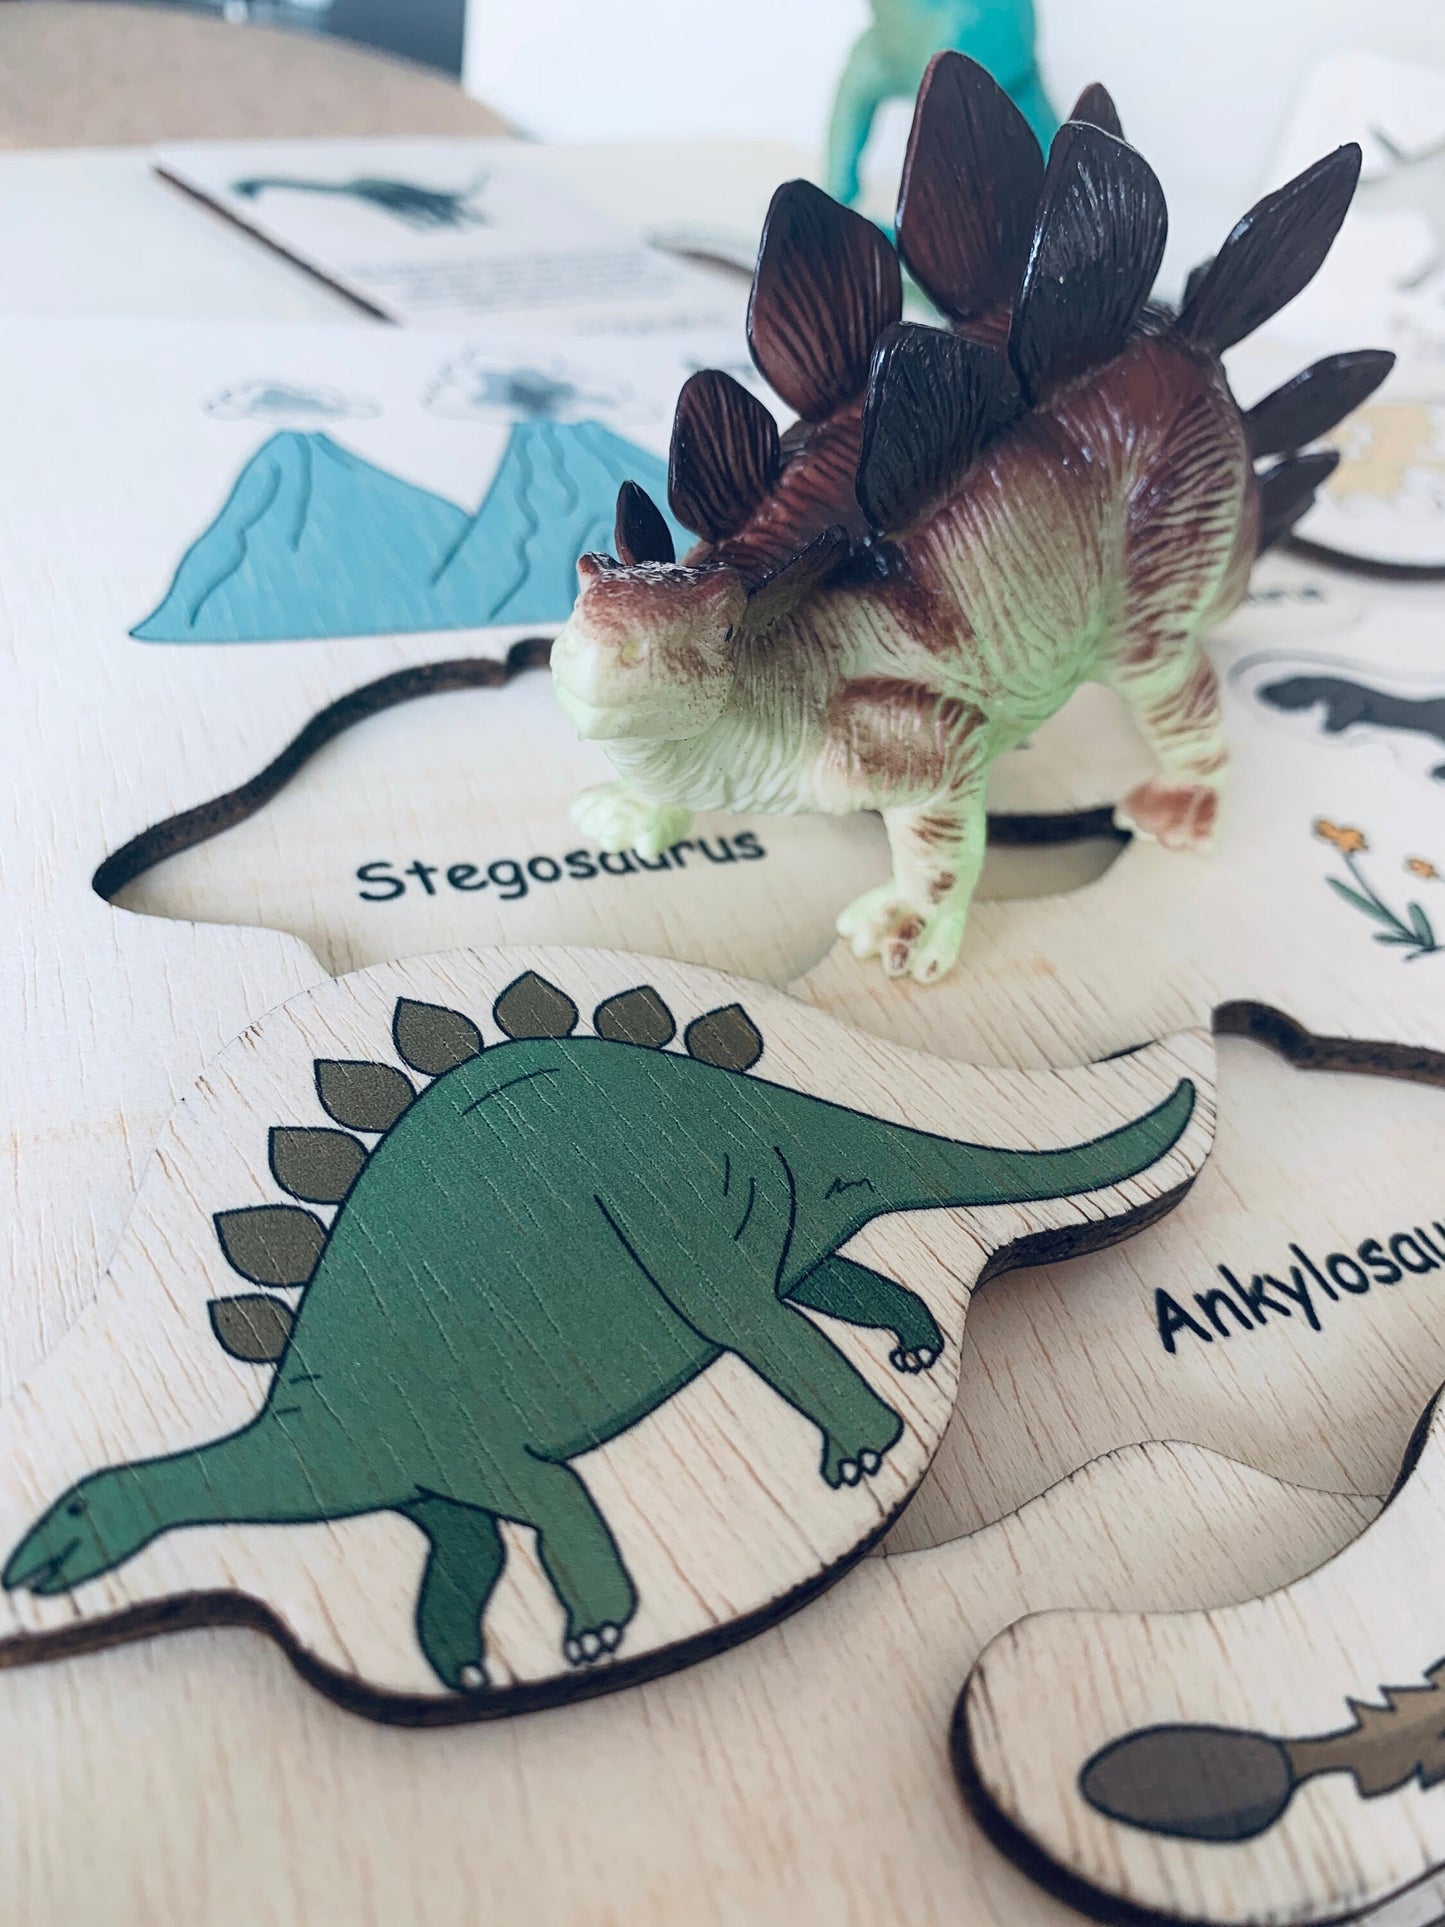 Wooden Dinosaur Puzzle, Dino Puzzle, Learning Dinosaur Types, Educational Toy